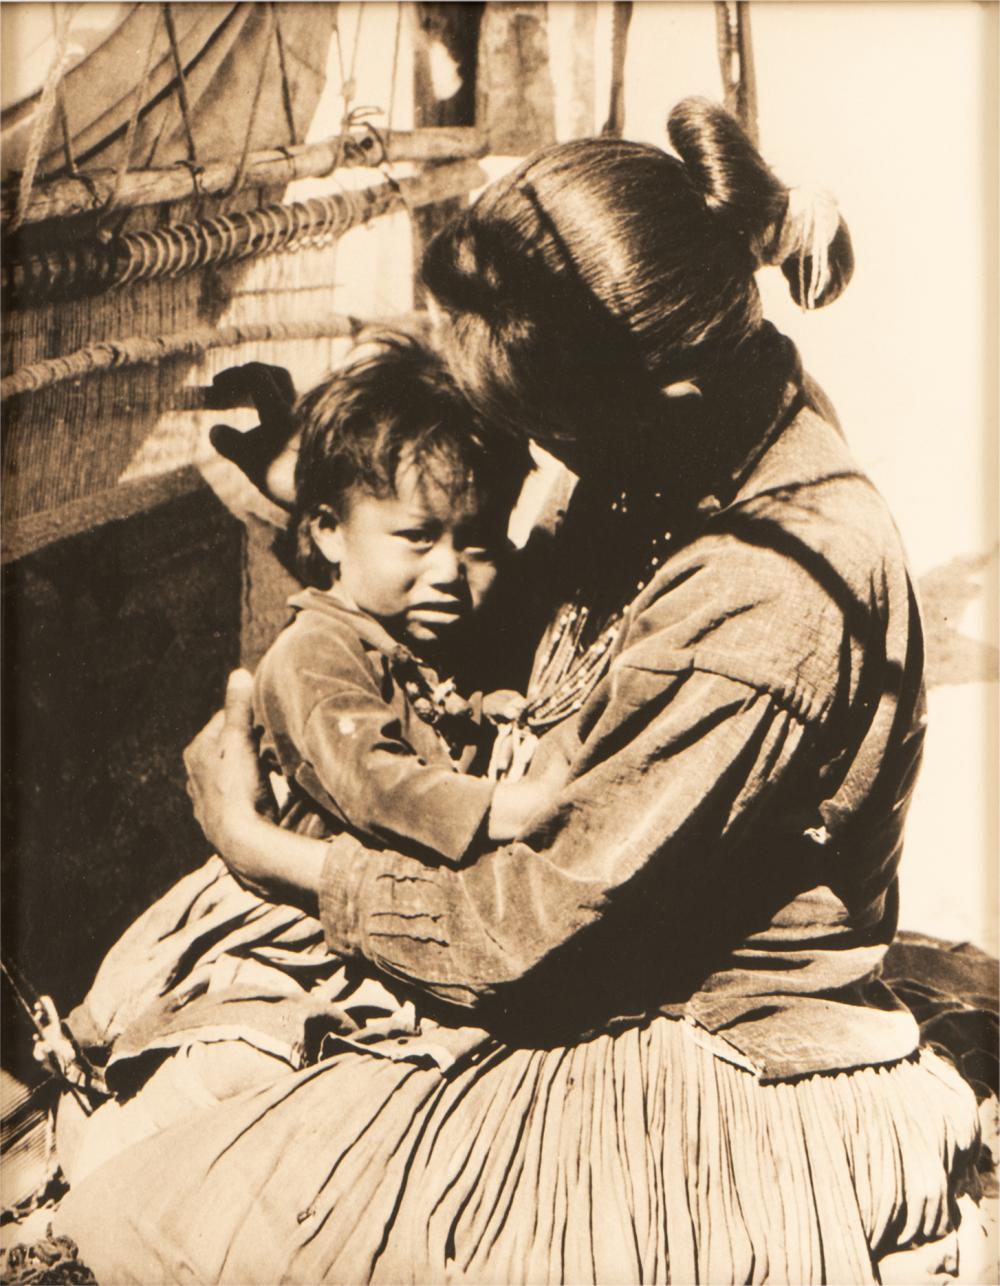 AFTER HARRY H. HAWORTH: NAVAJO MOTHER